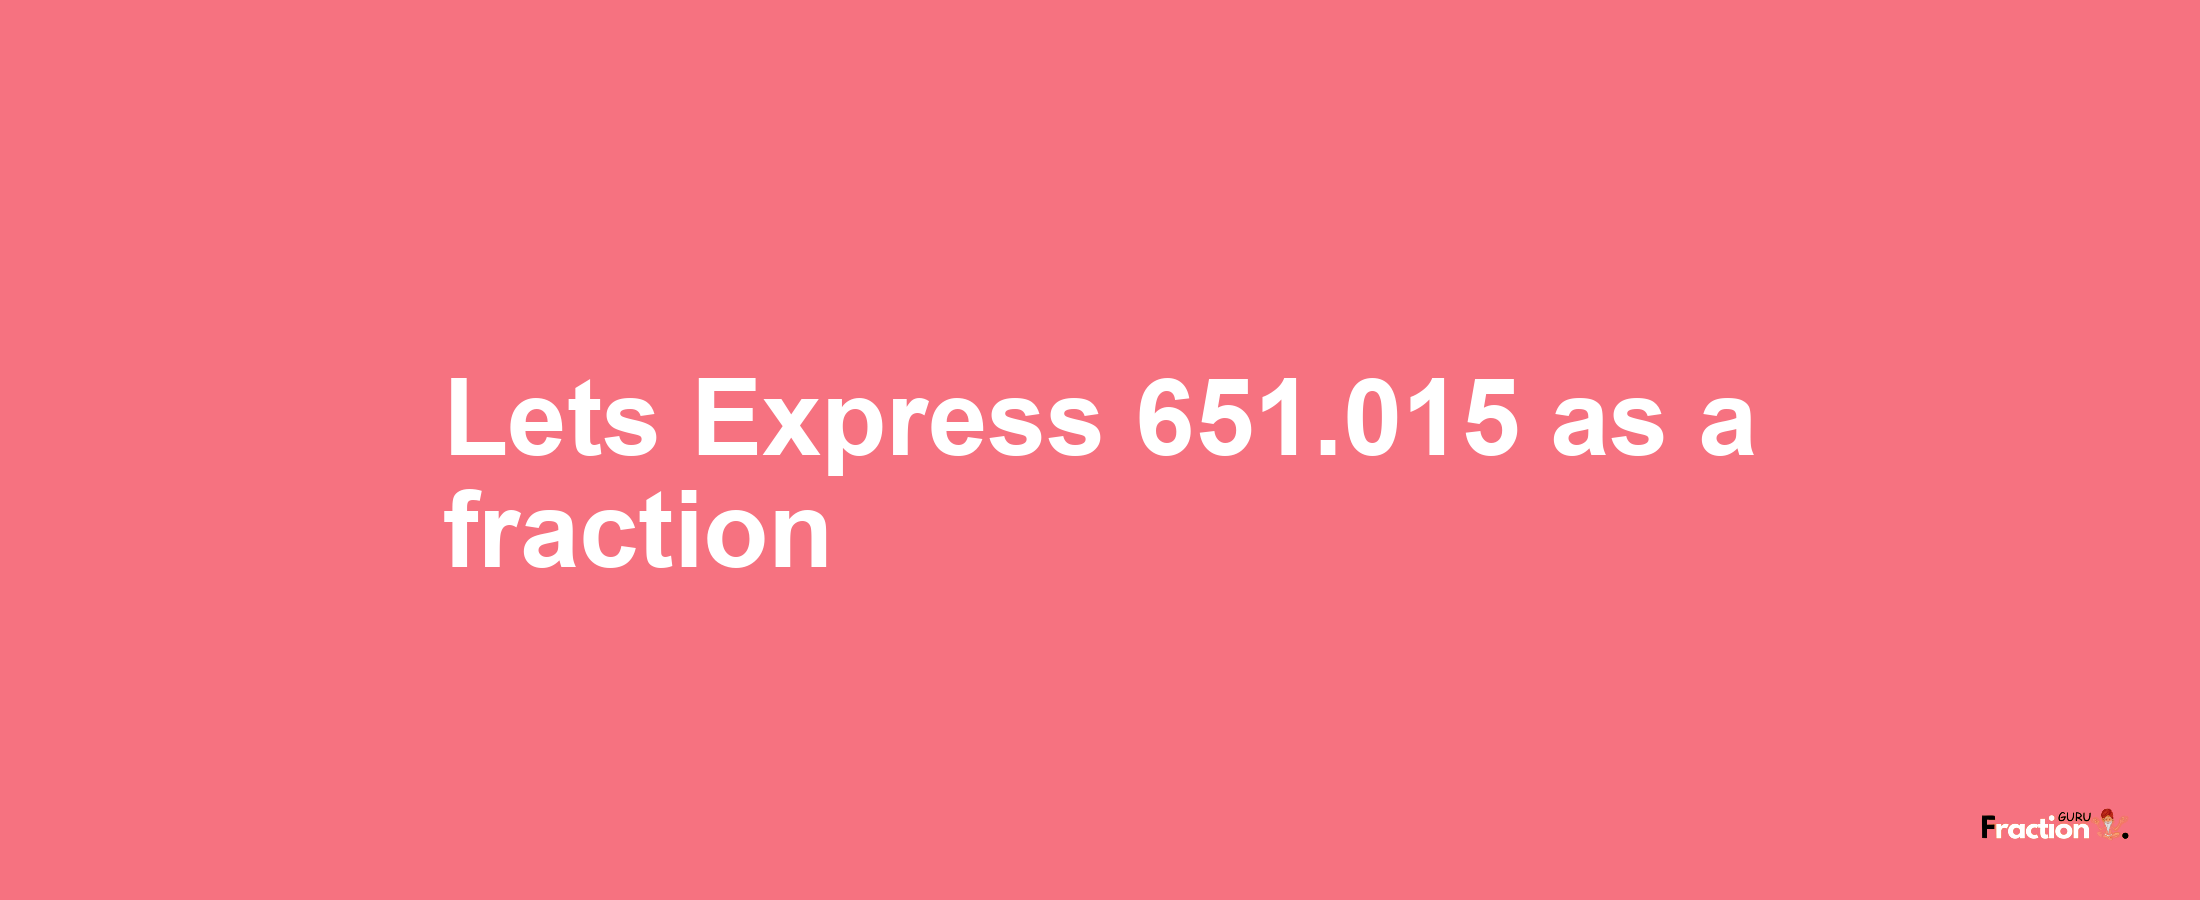 Lets Express 651.015 as afraction